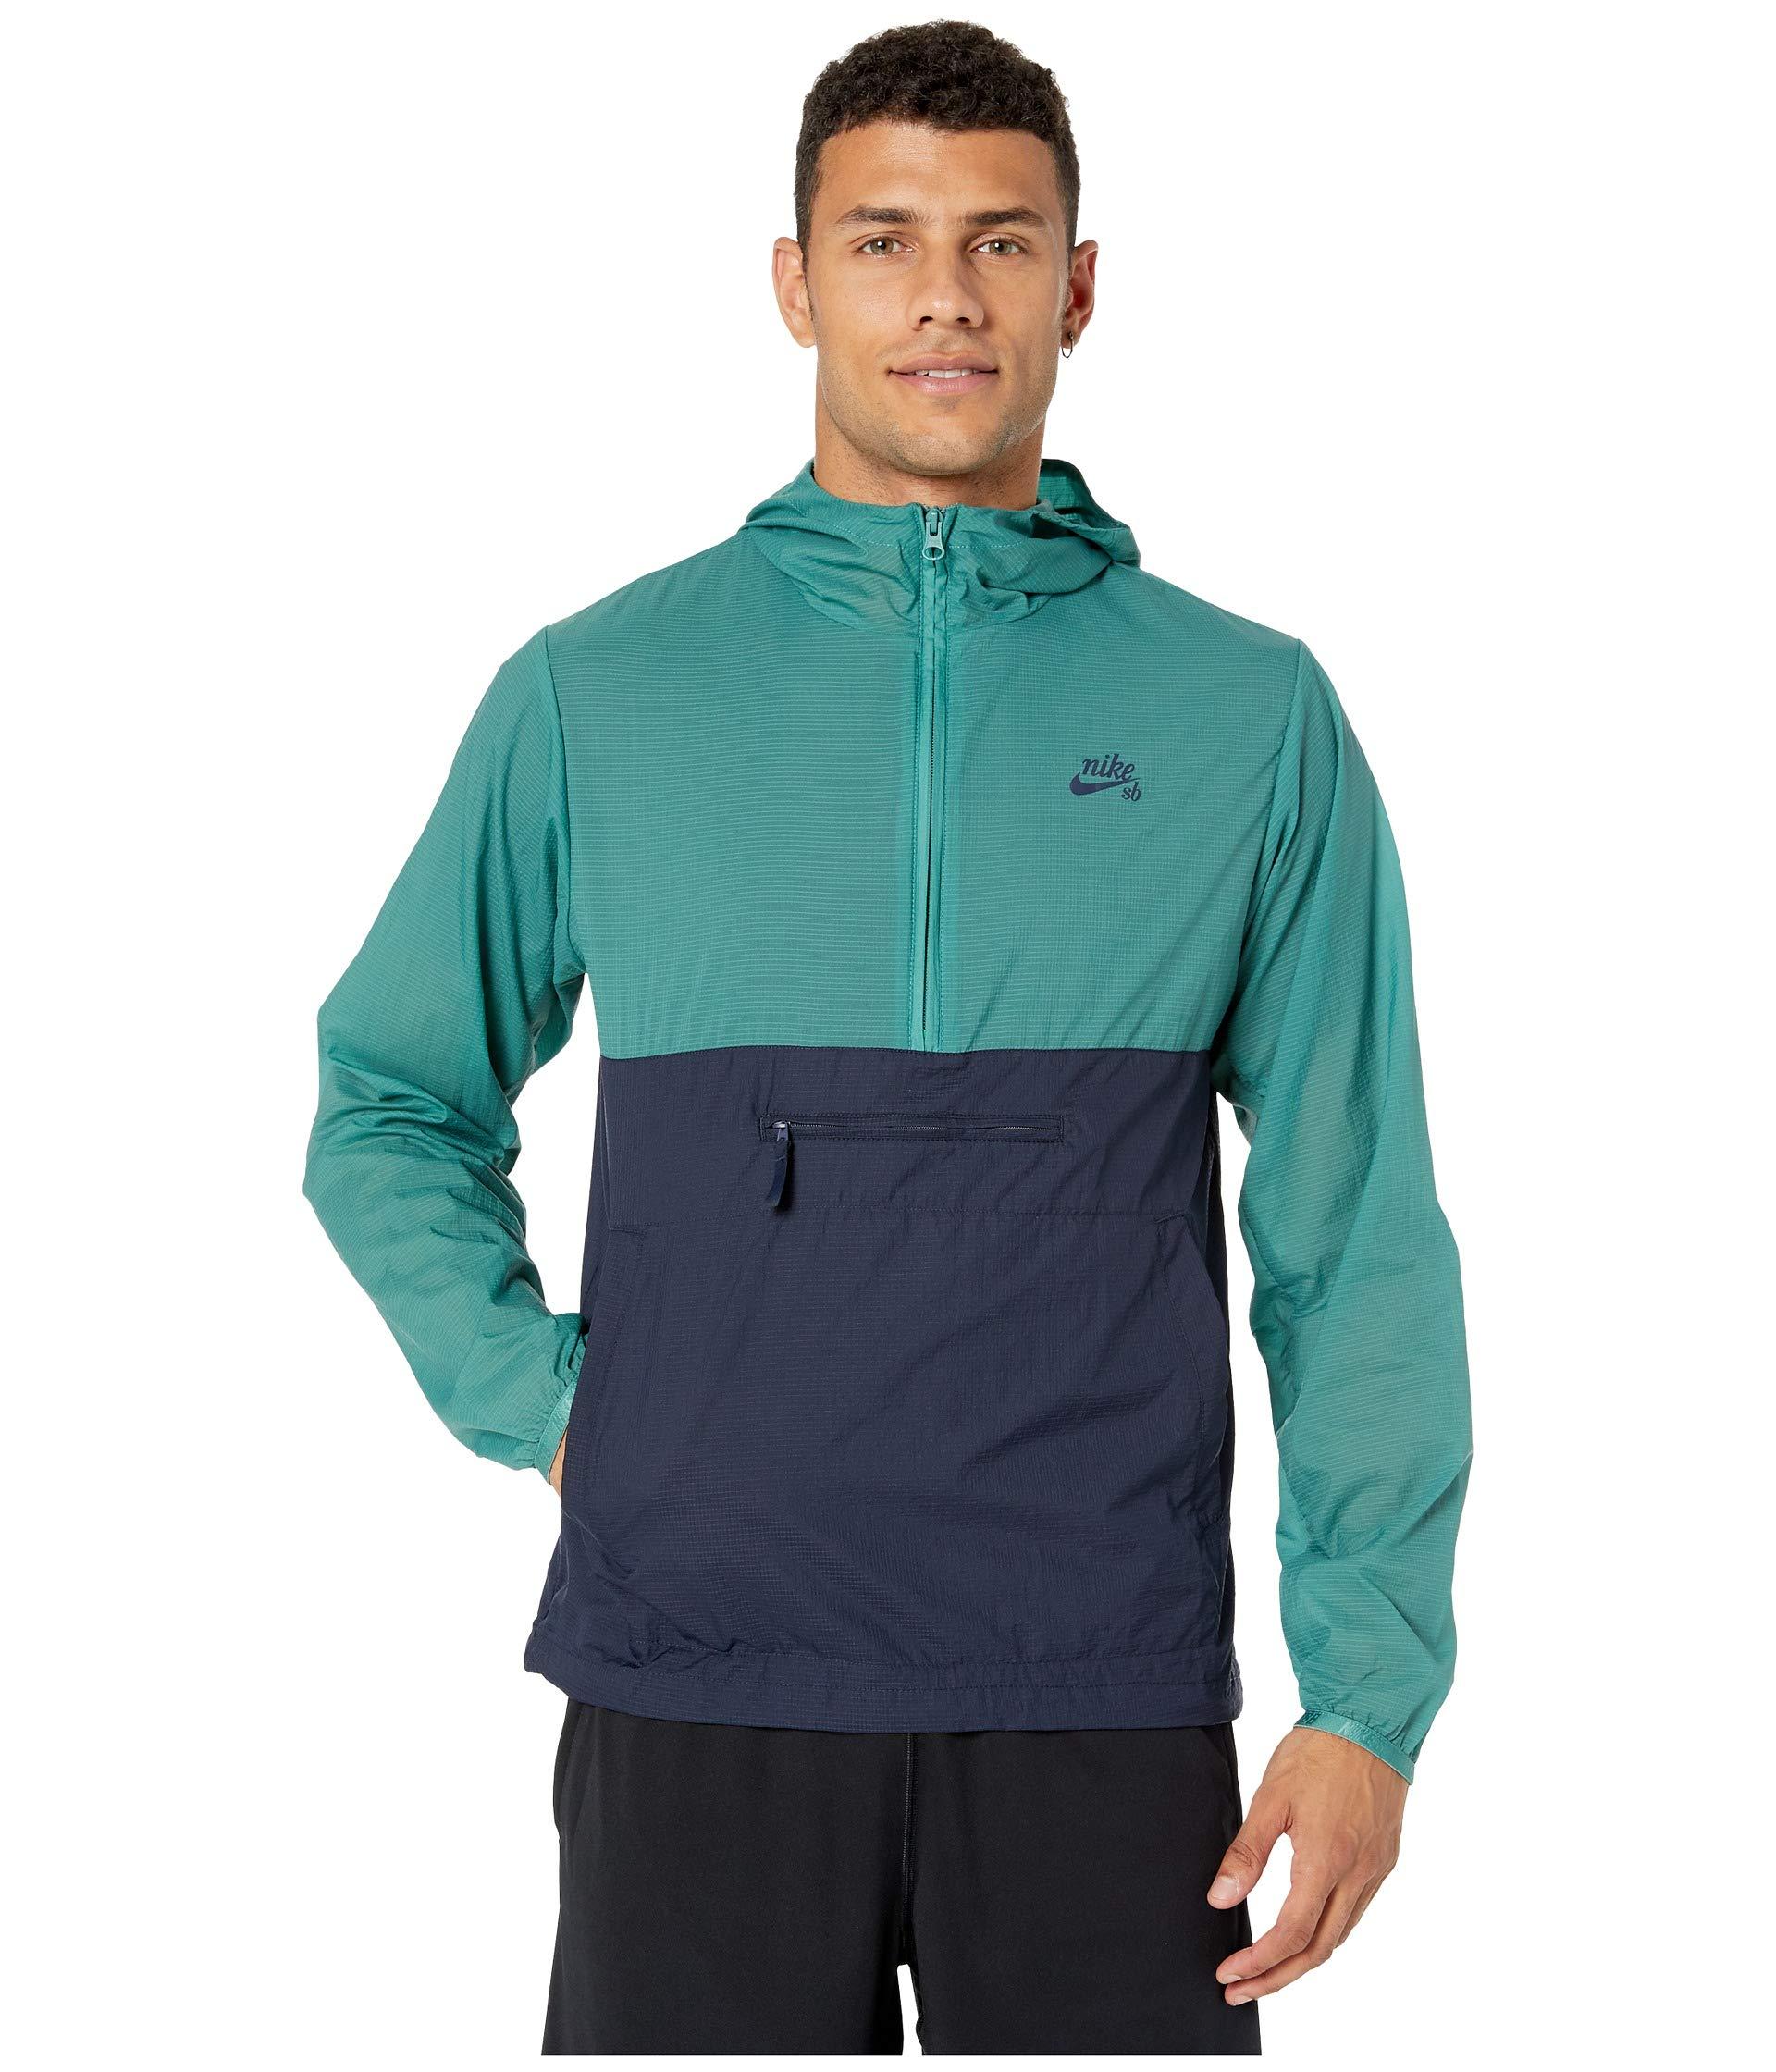 Nike Synthetic Sb Anorak Jacket in Green for Men - Lyst